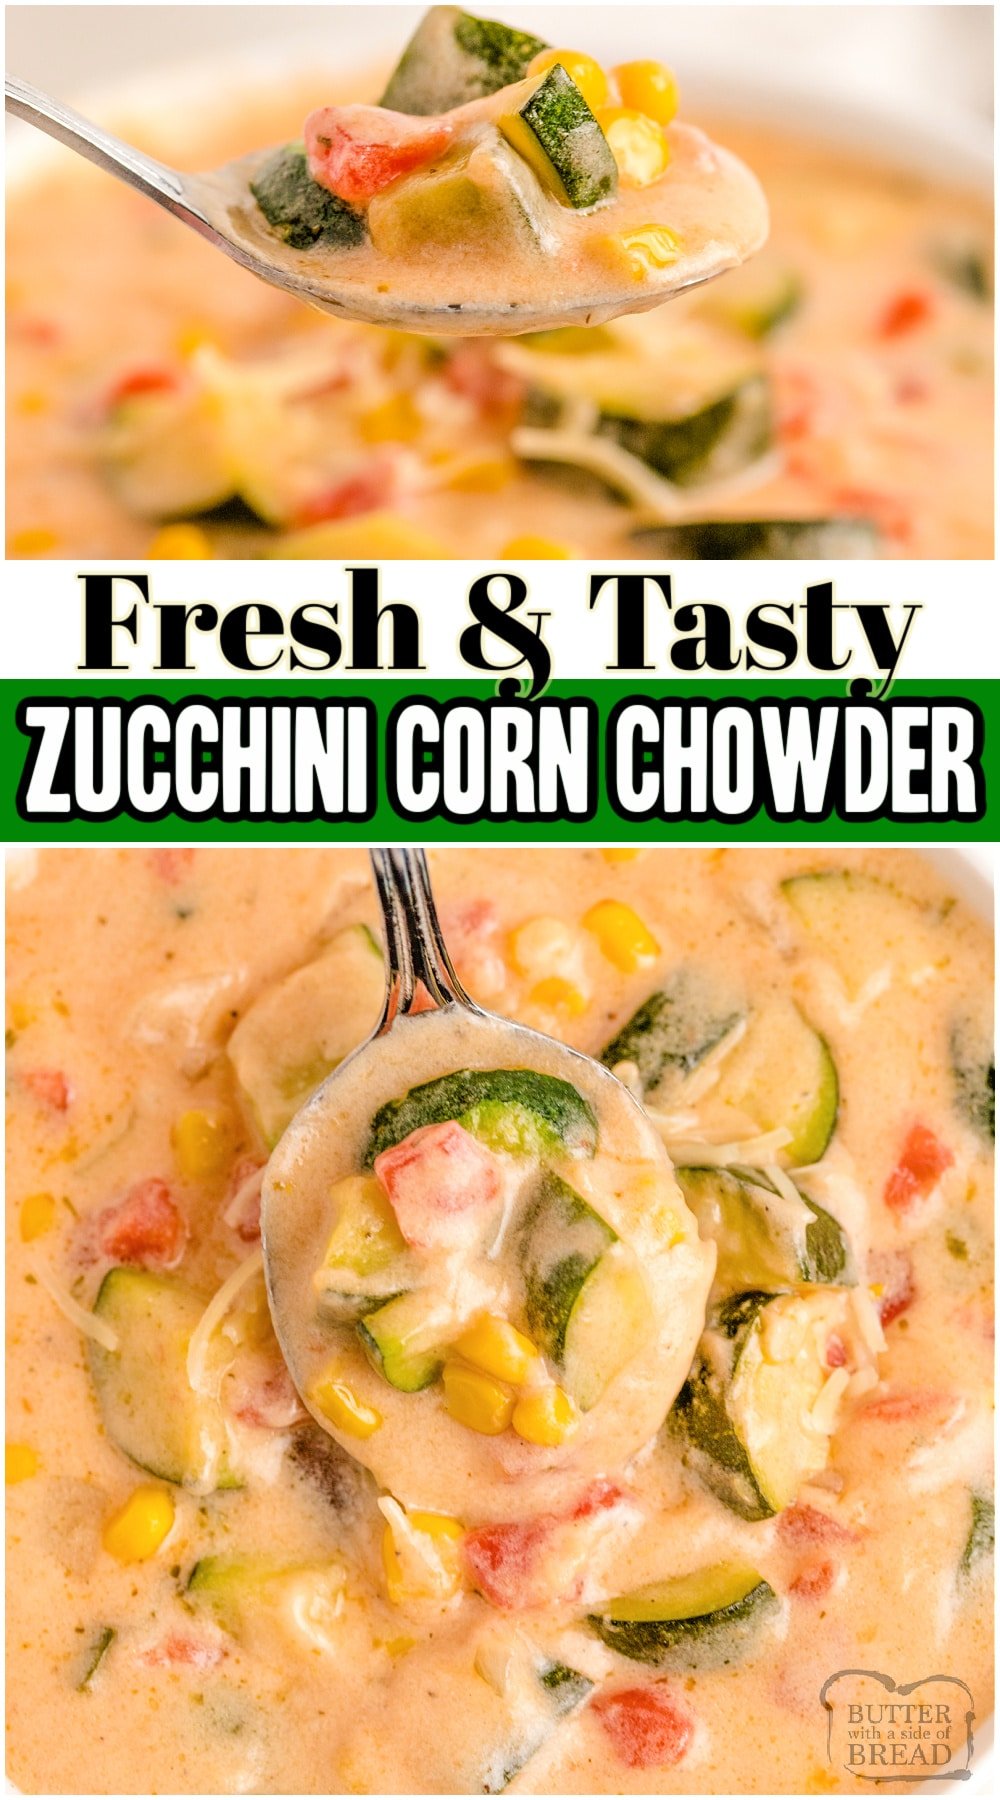 Zucchini Corn Chowder recipe that's perfect for summer dinners when the garden is plentiful. Great way to use fresh summer vegetables in an easy summer chowder recipe.